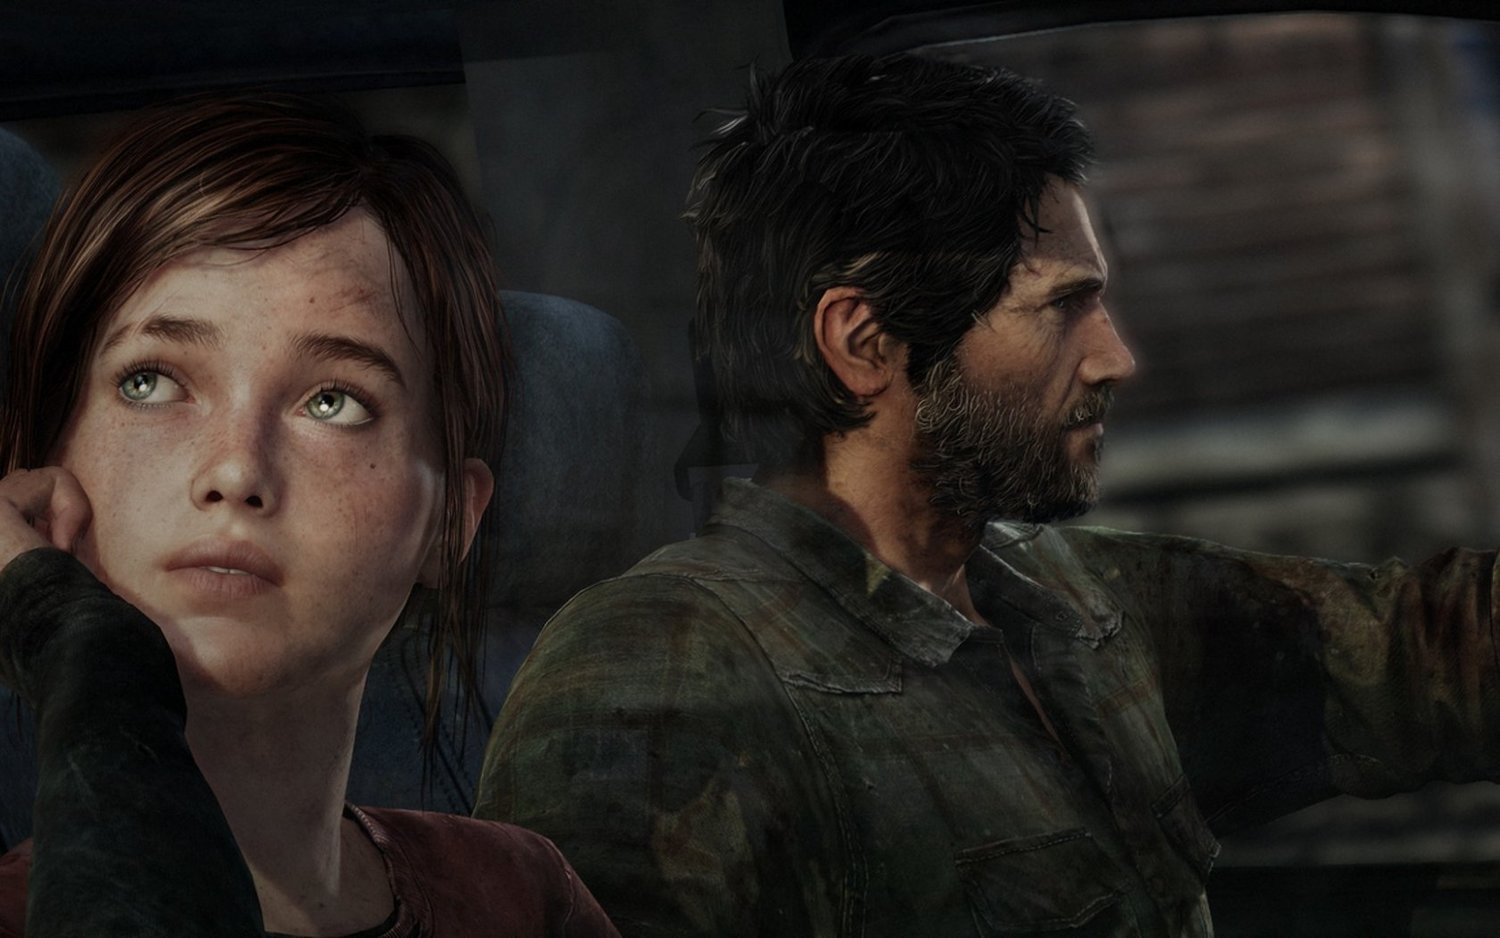 rsz_video_games_naughty_dog_playstation_3_the_last_of_us_joel_ellie_sony_computer_entertainment_1680x1050